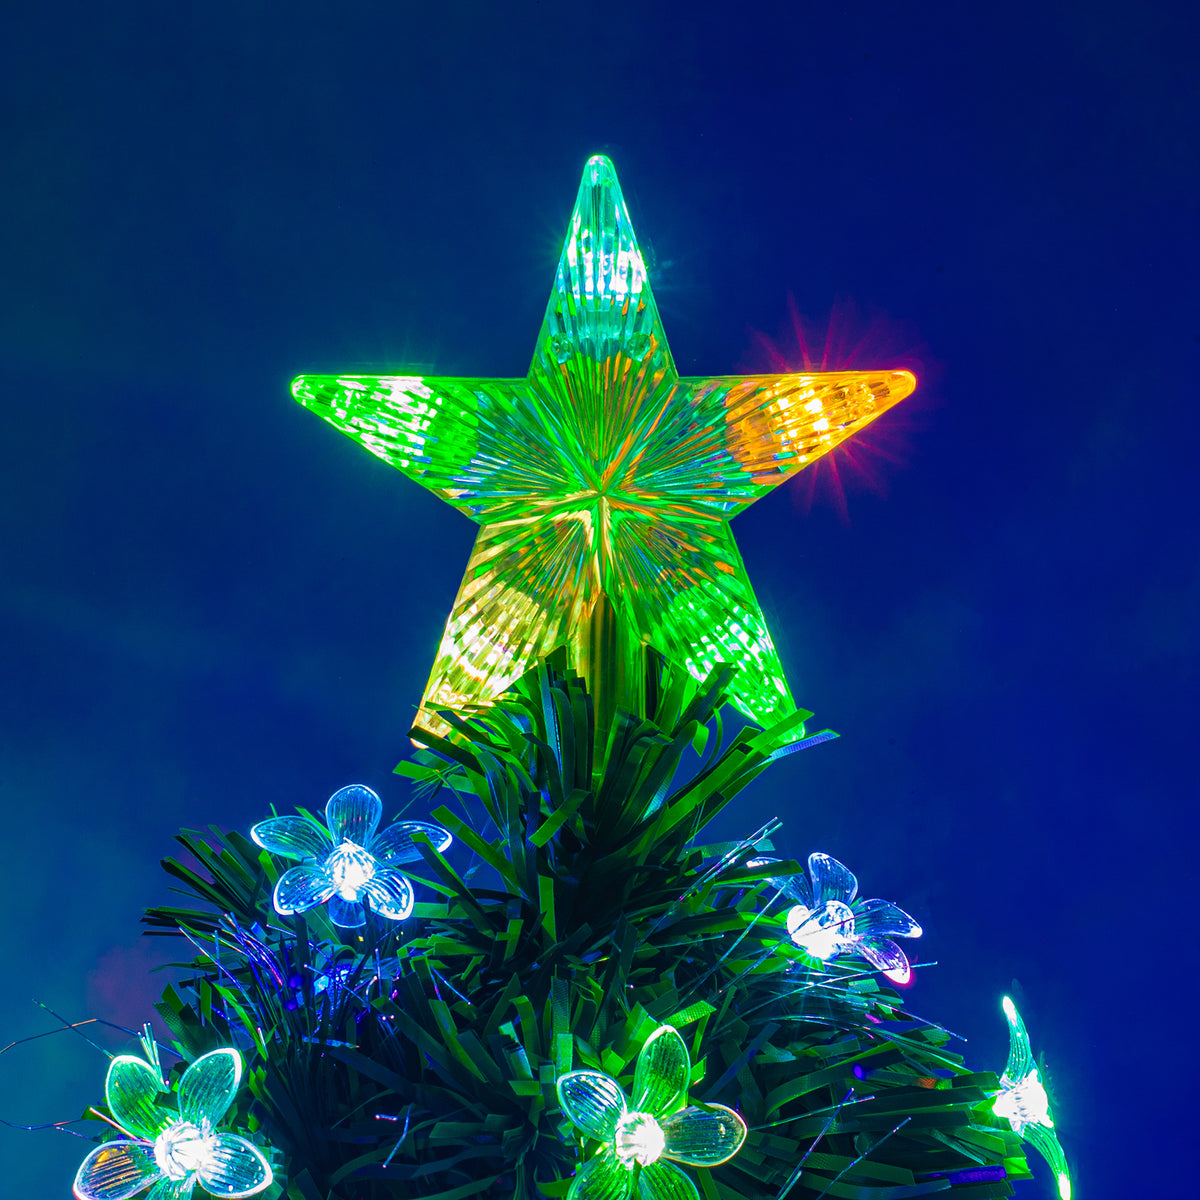 Green Fibre Optic Christmas Tree 2ft to 4ft with Multi Coloured Fibre Optics and Flowers